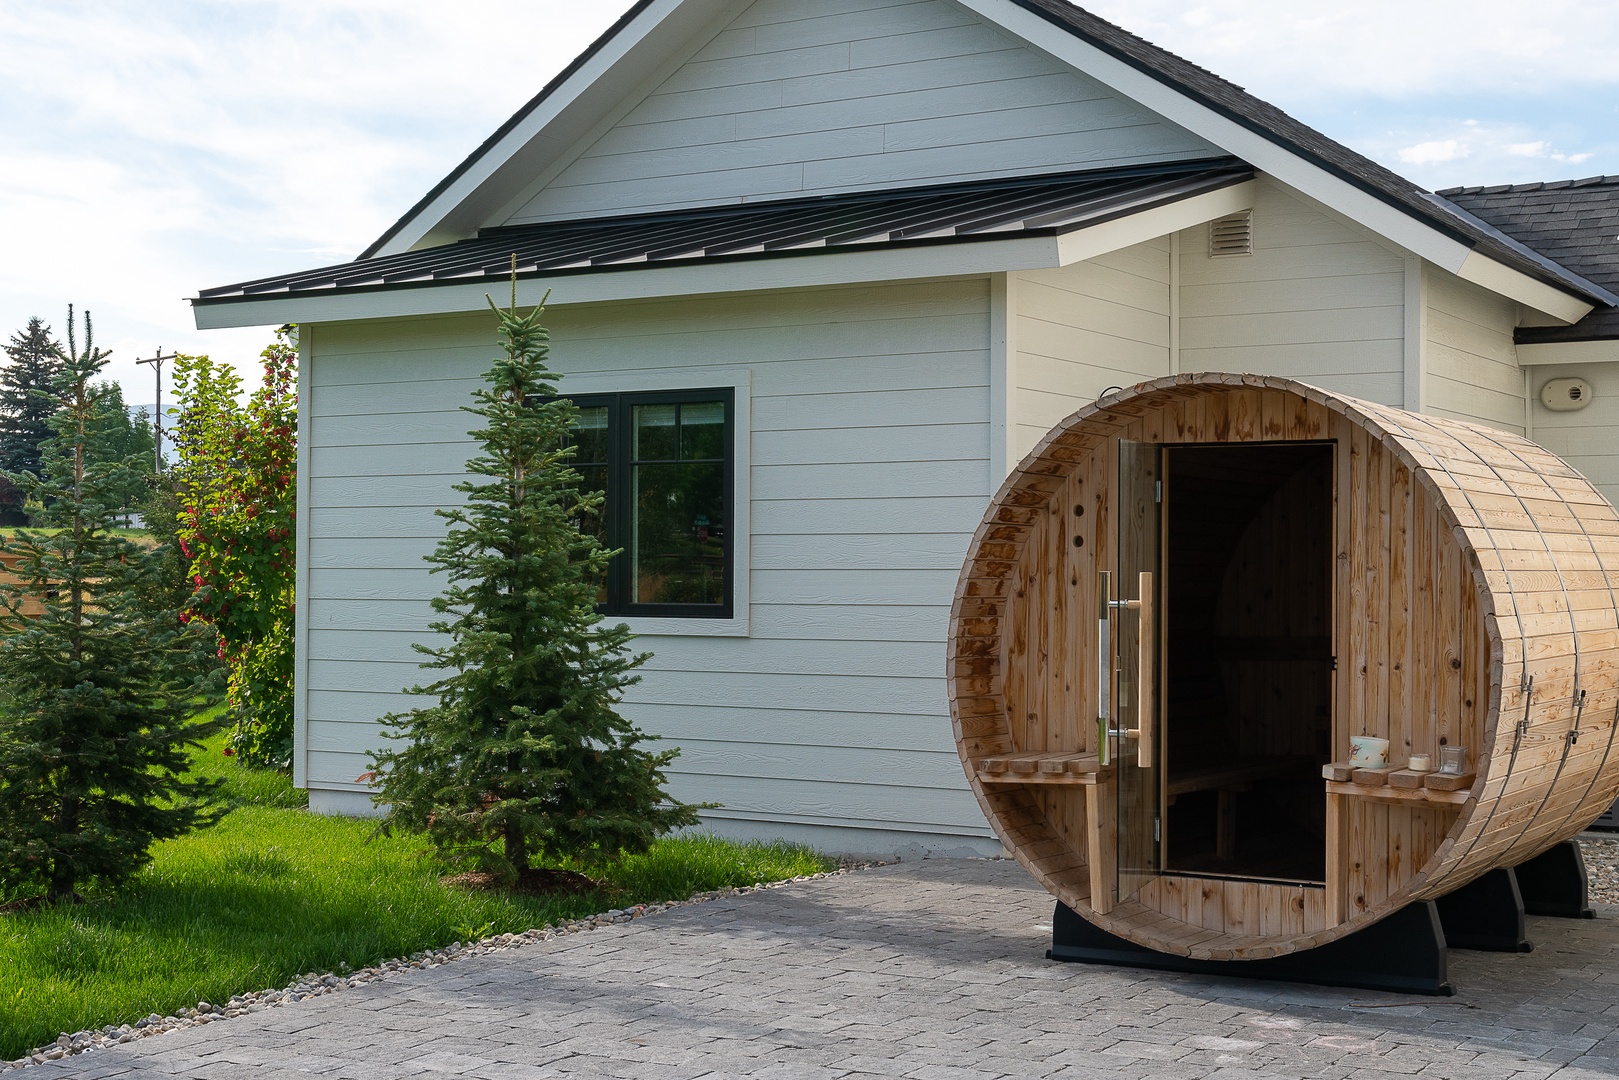 Hailey Vacation Rentals, Contemporary Red Feather Comfort - There's a private barrel-shaped sauna just out back